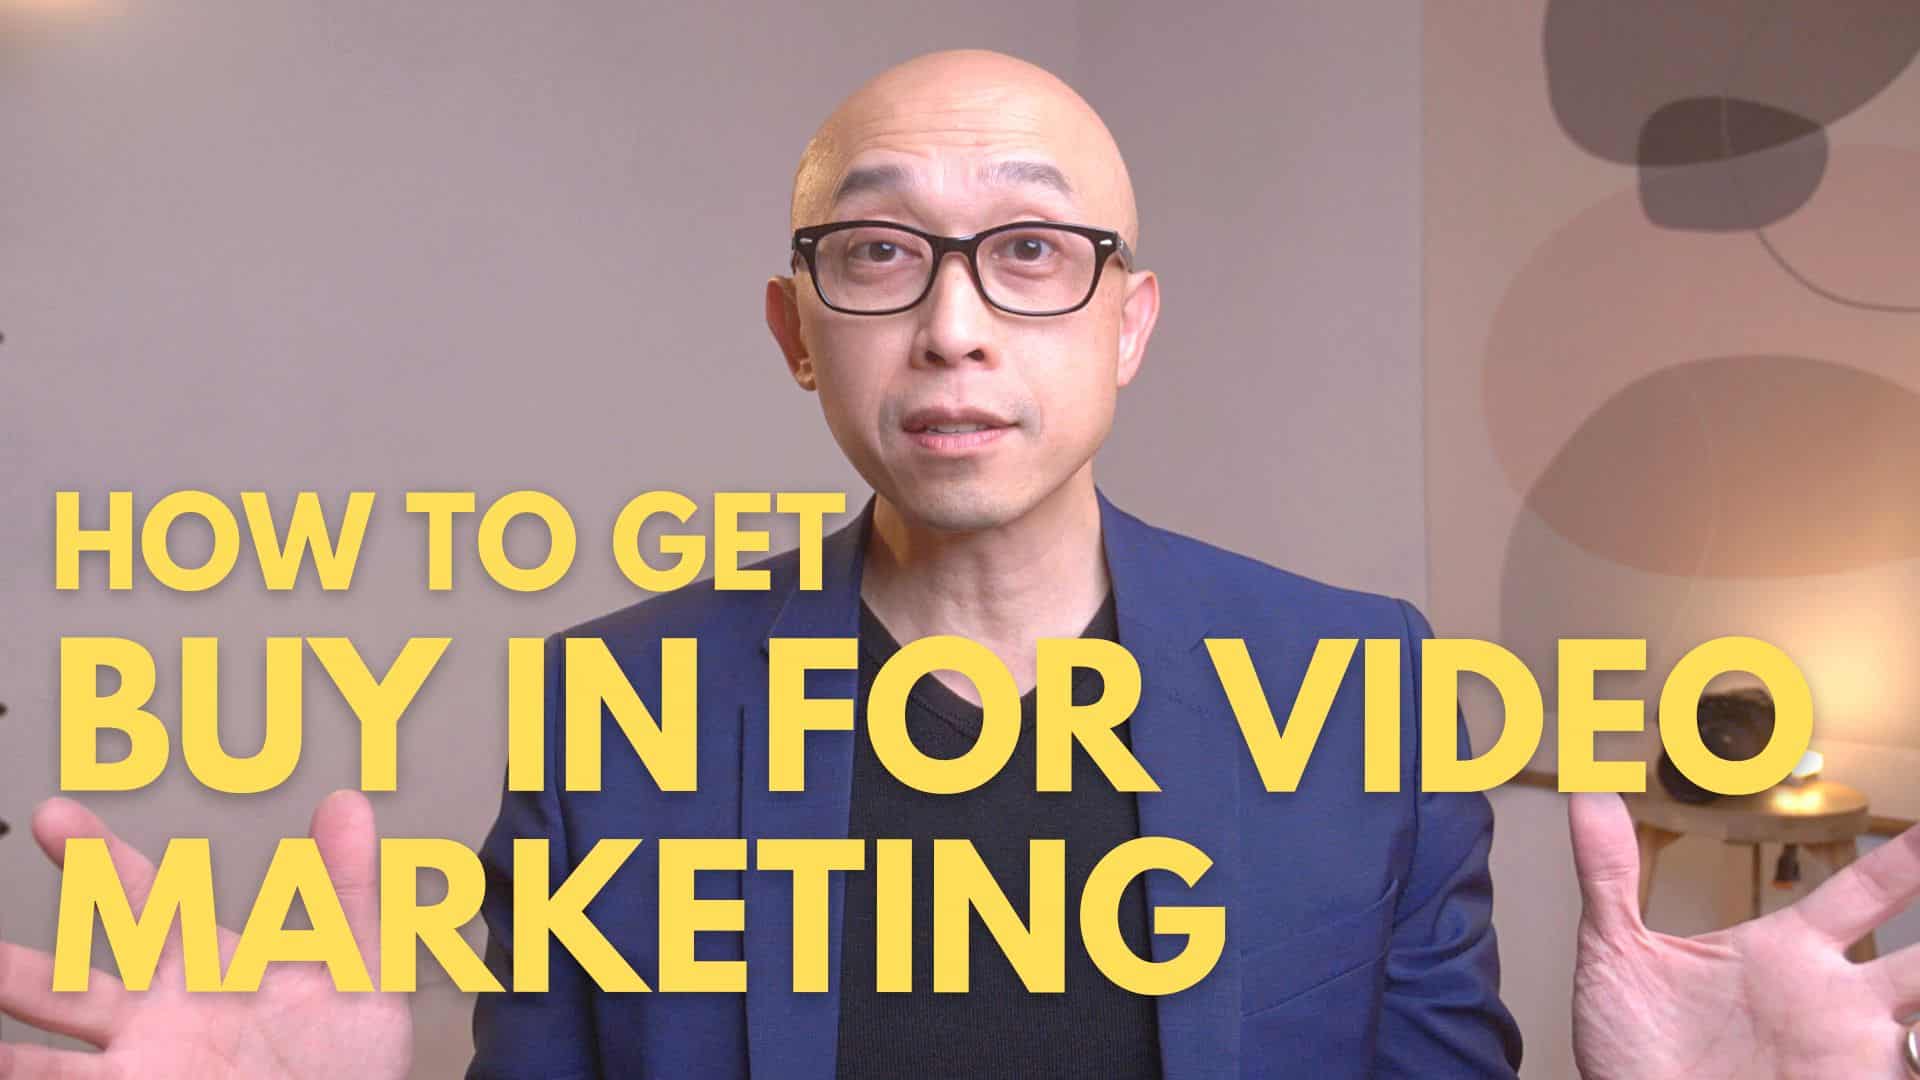 How to Get Buy-In for Video Marketing